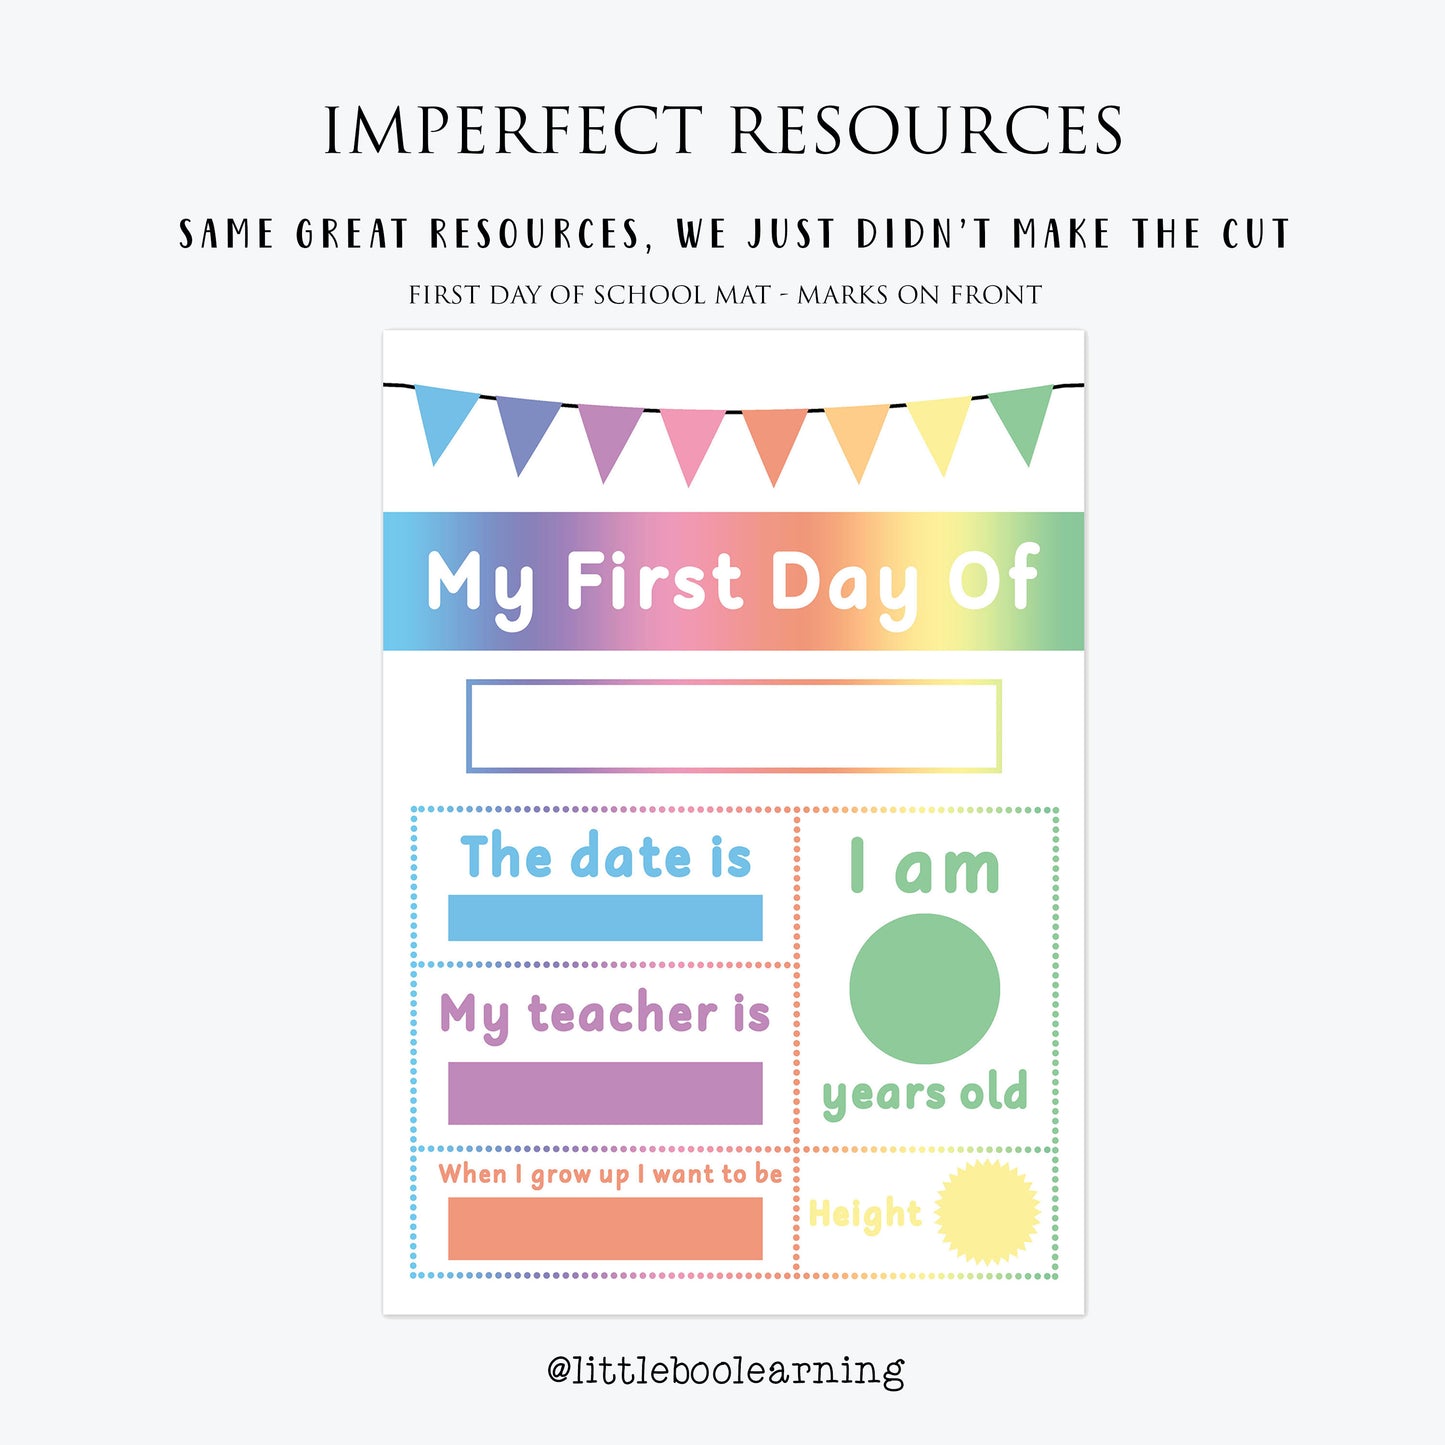 First Day of School Mat - Imperfect